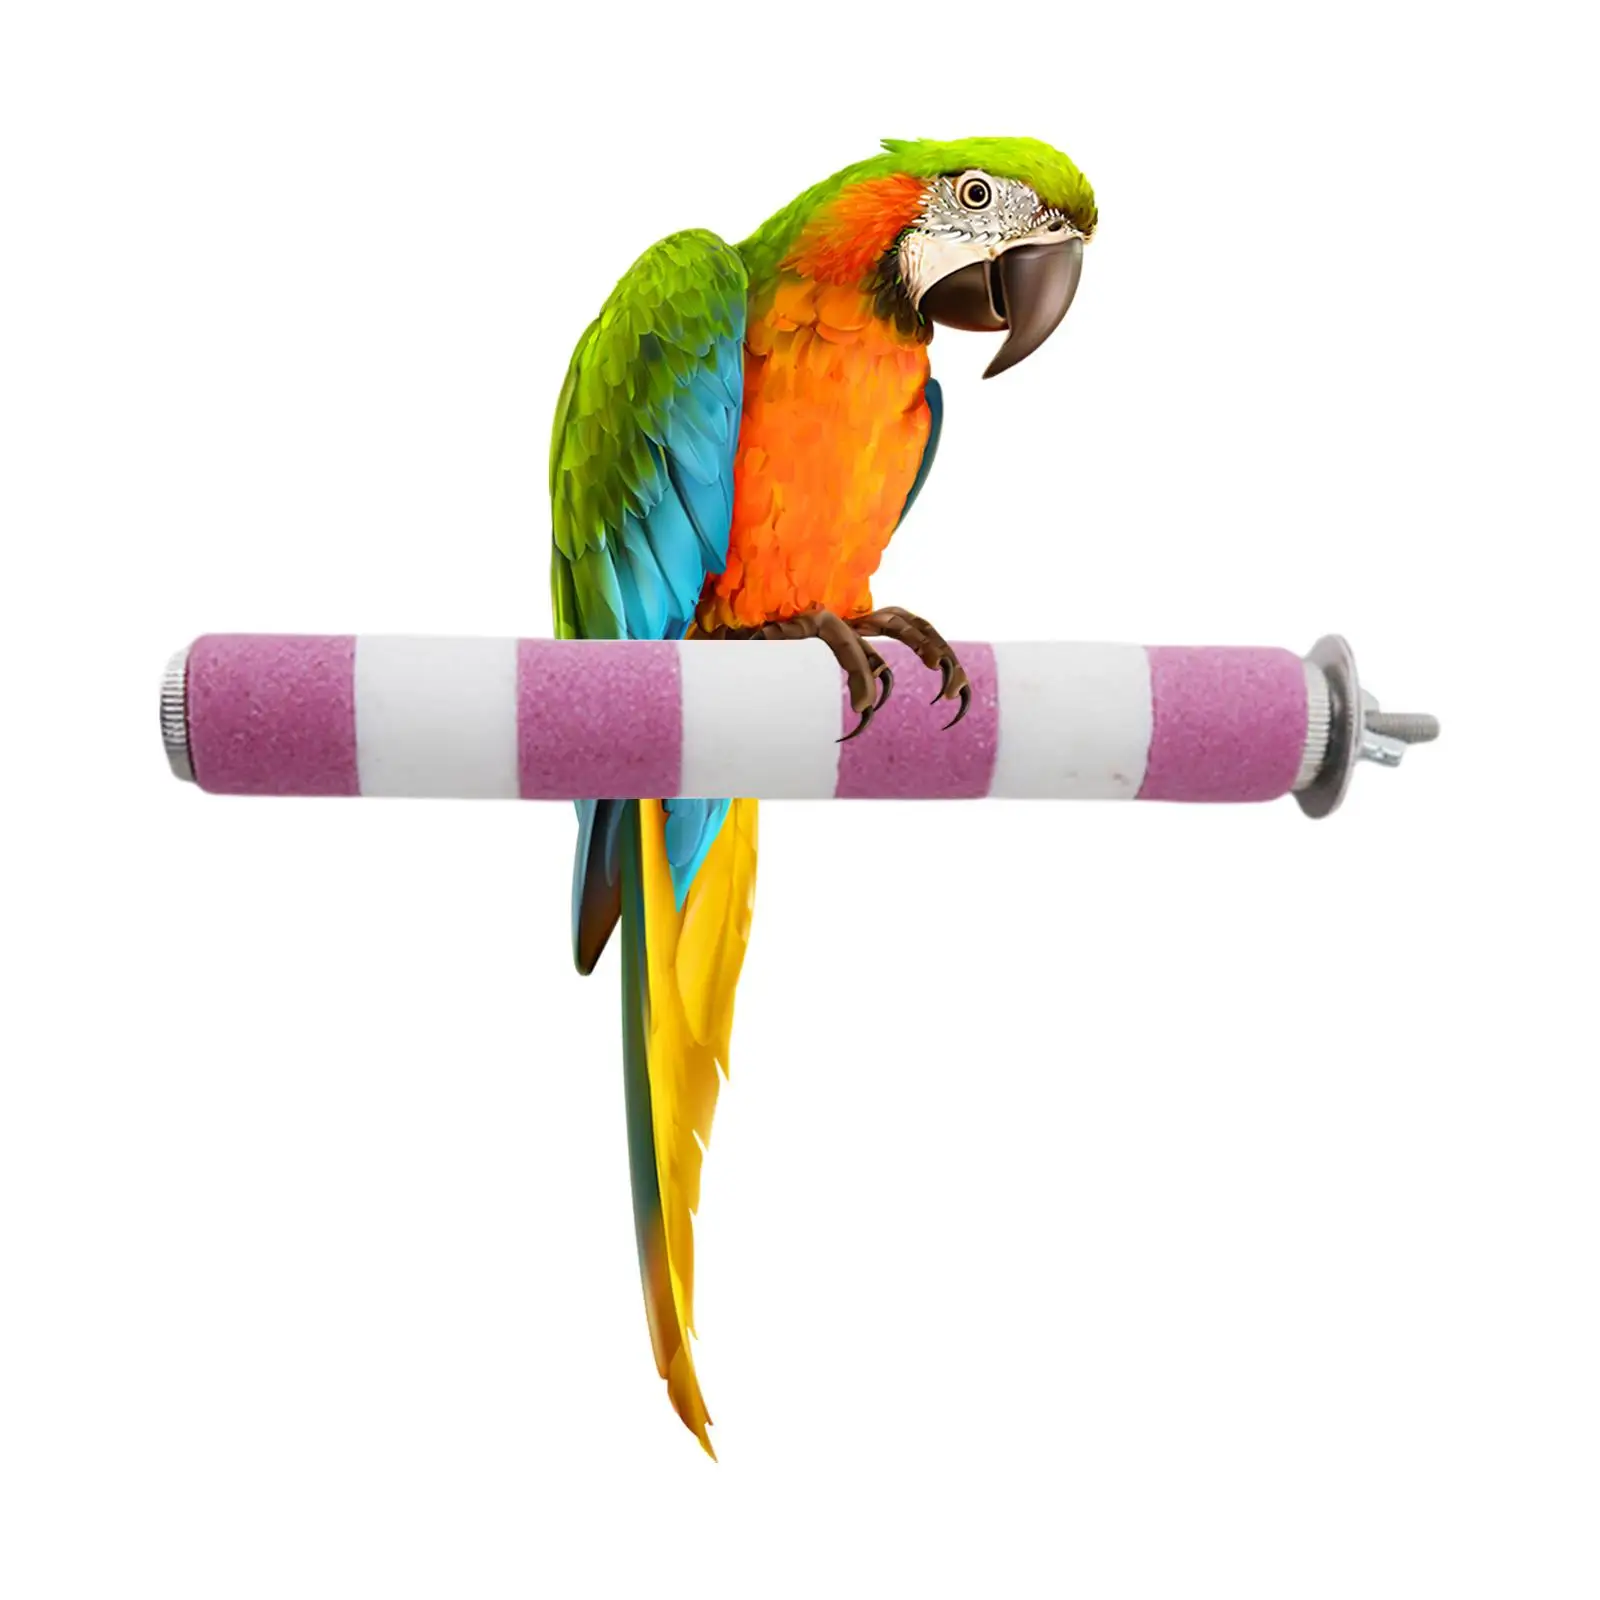 1Pc Parrot Cage Rough Surface Wood Paw Grinding Perch Stand Stick Platform Bird Roller Toy Fit For Small And Medium Sized Birds